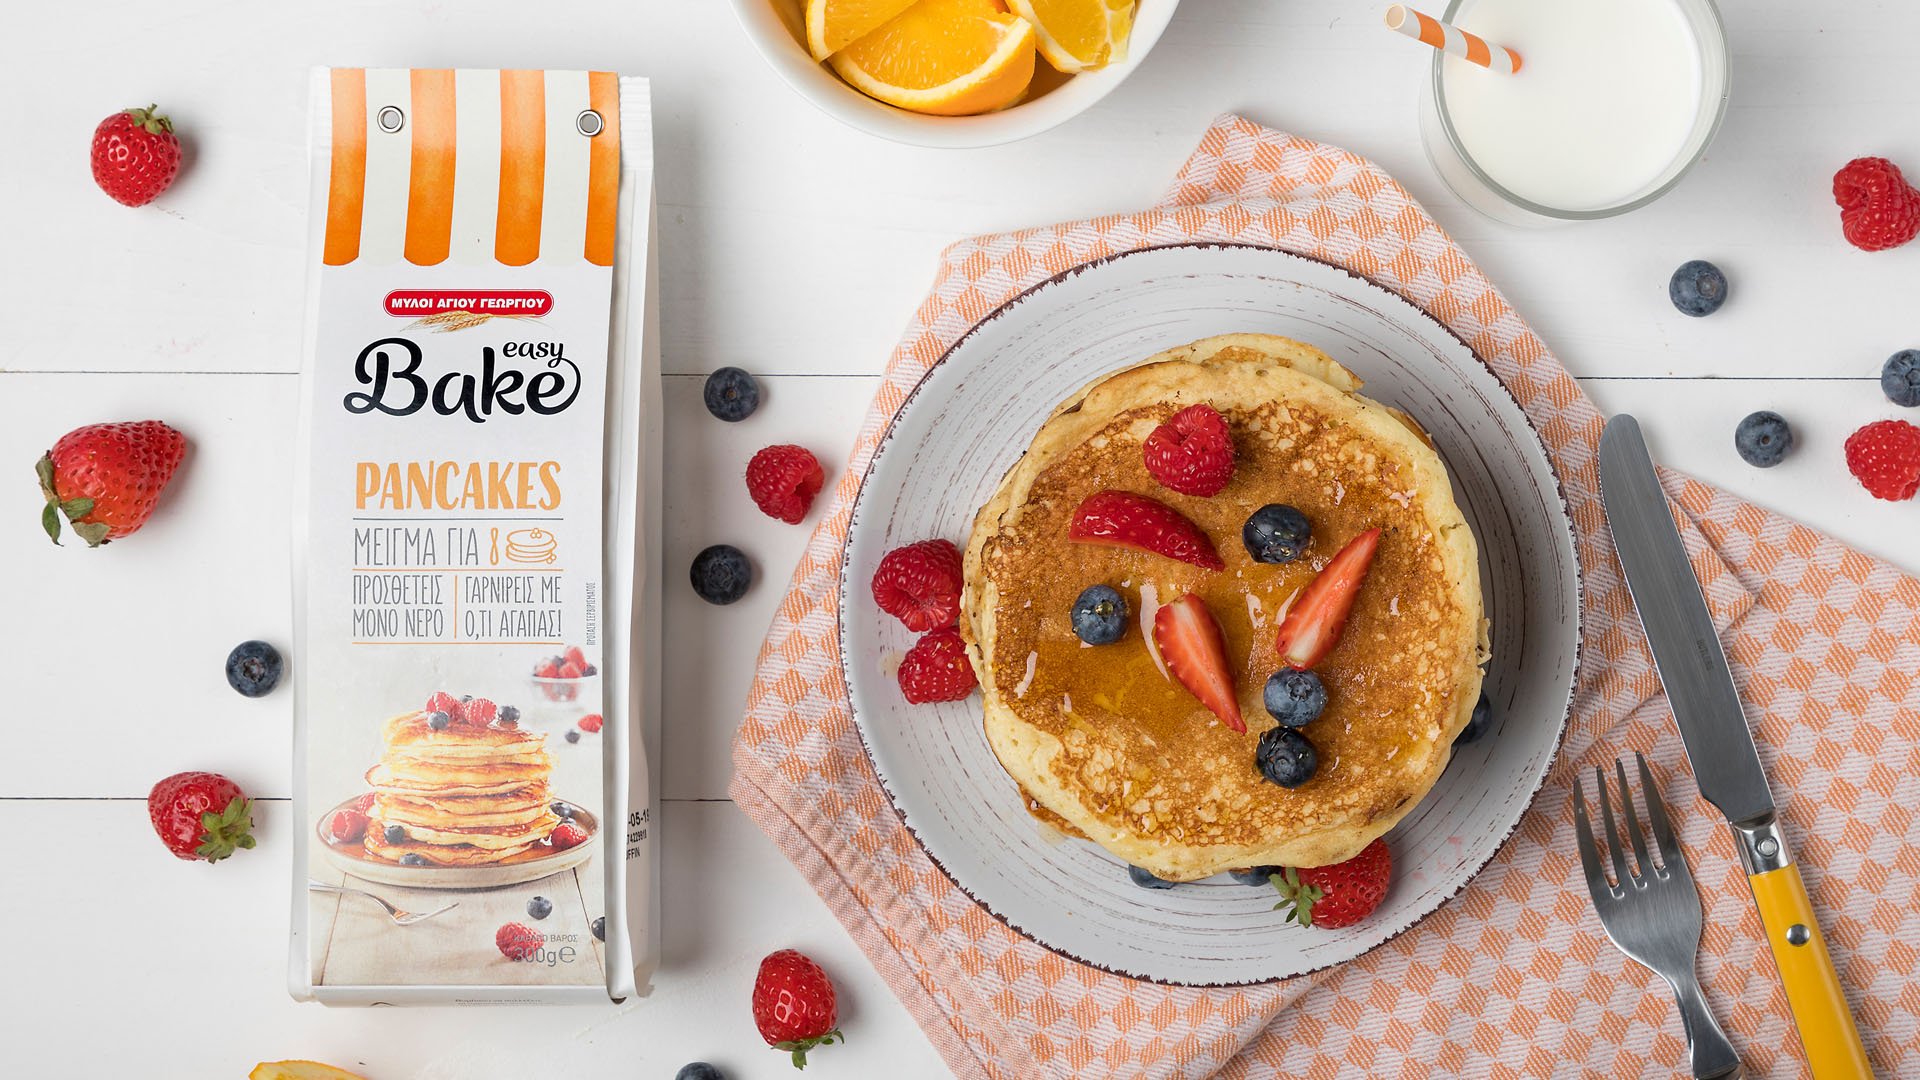 Food styling of pancakes topped by blueberries and strawberries next to Easy Bake pancake mix